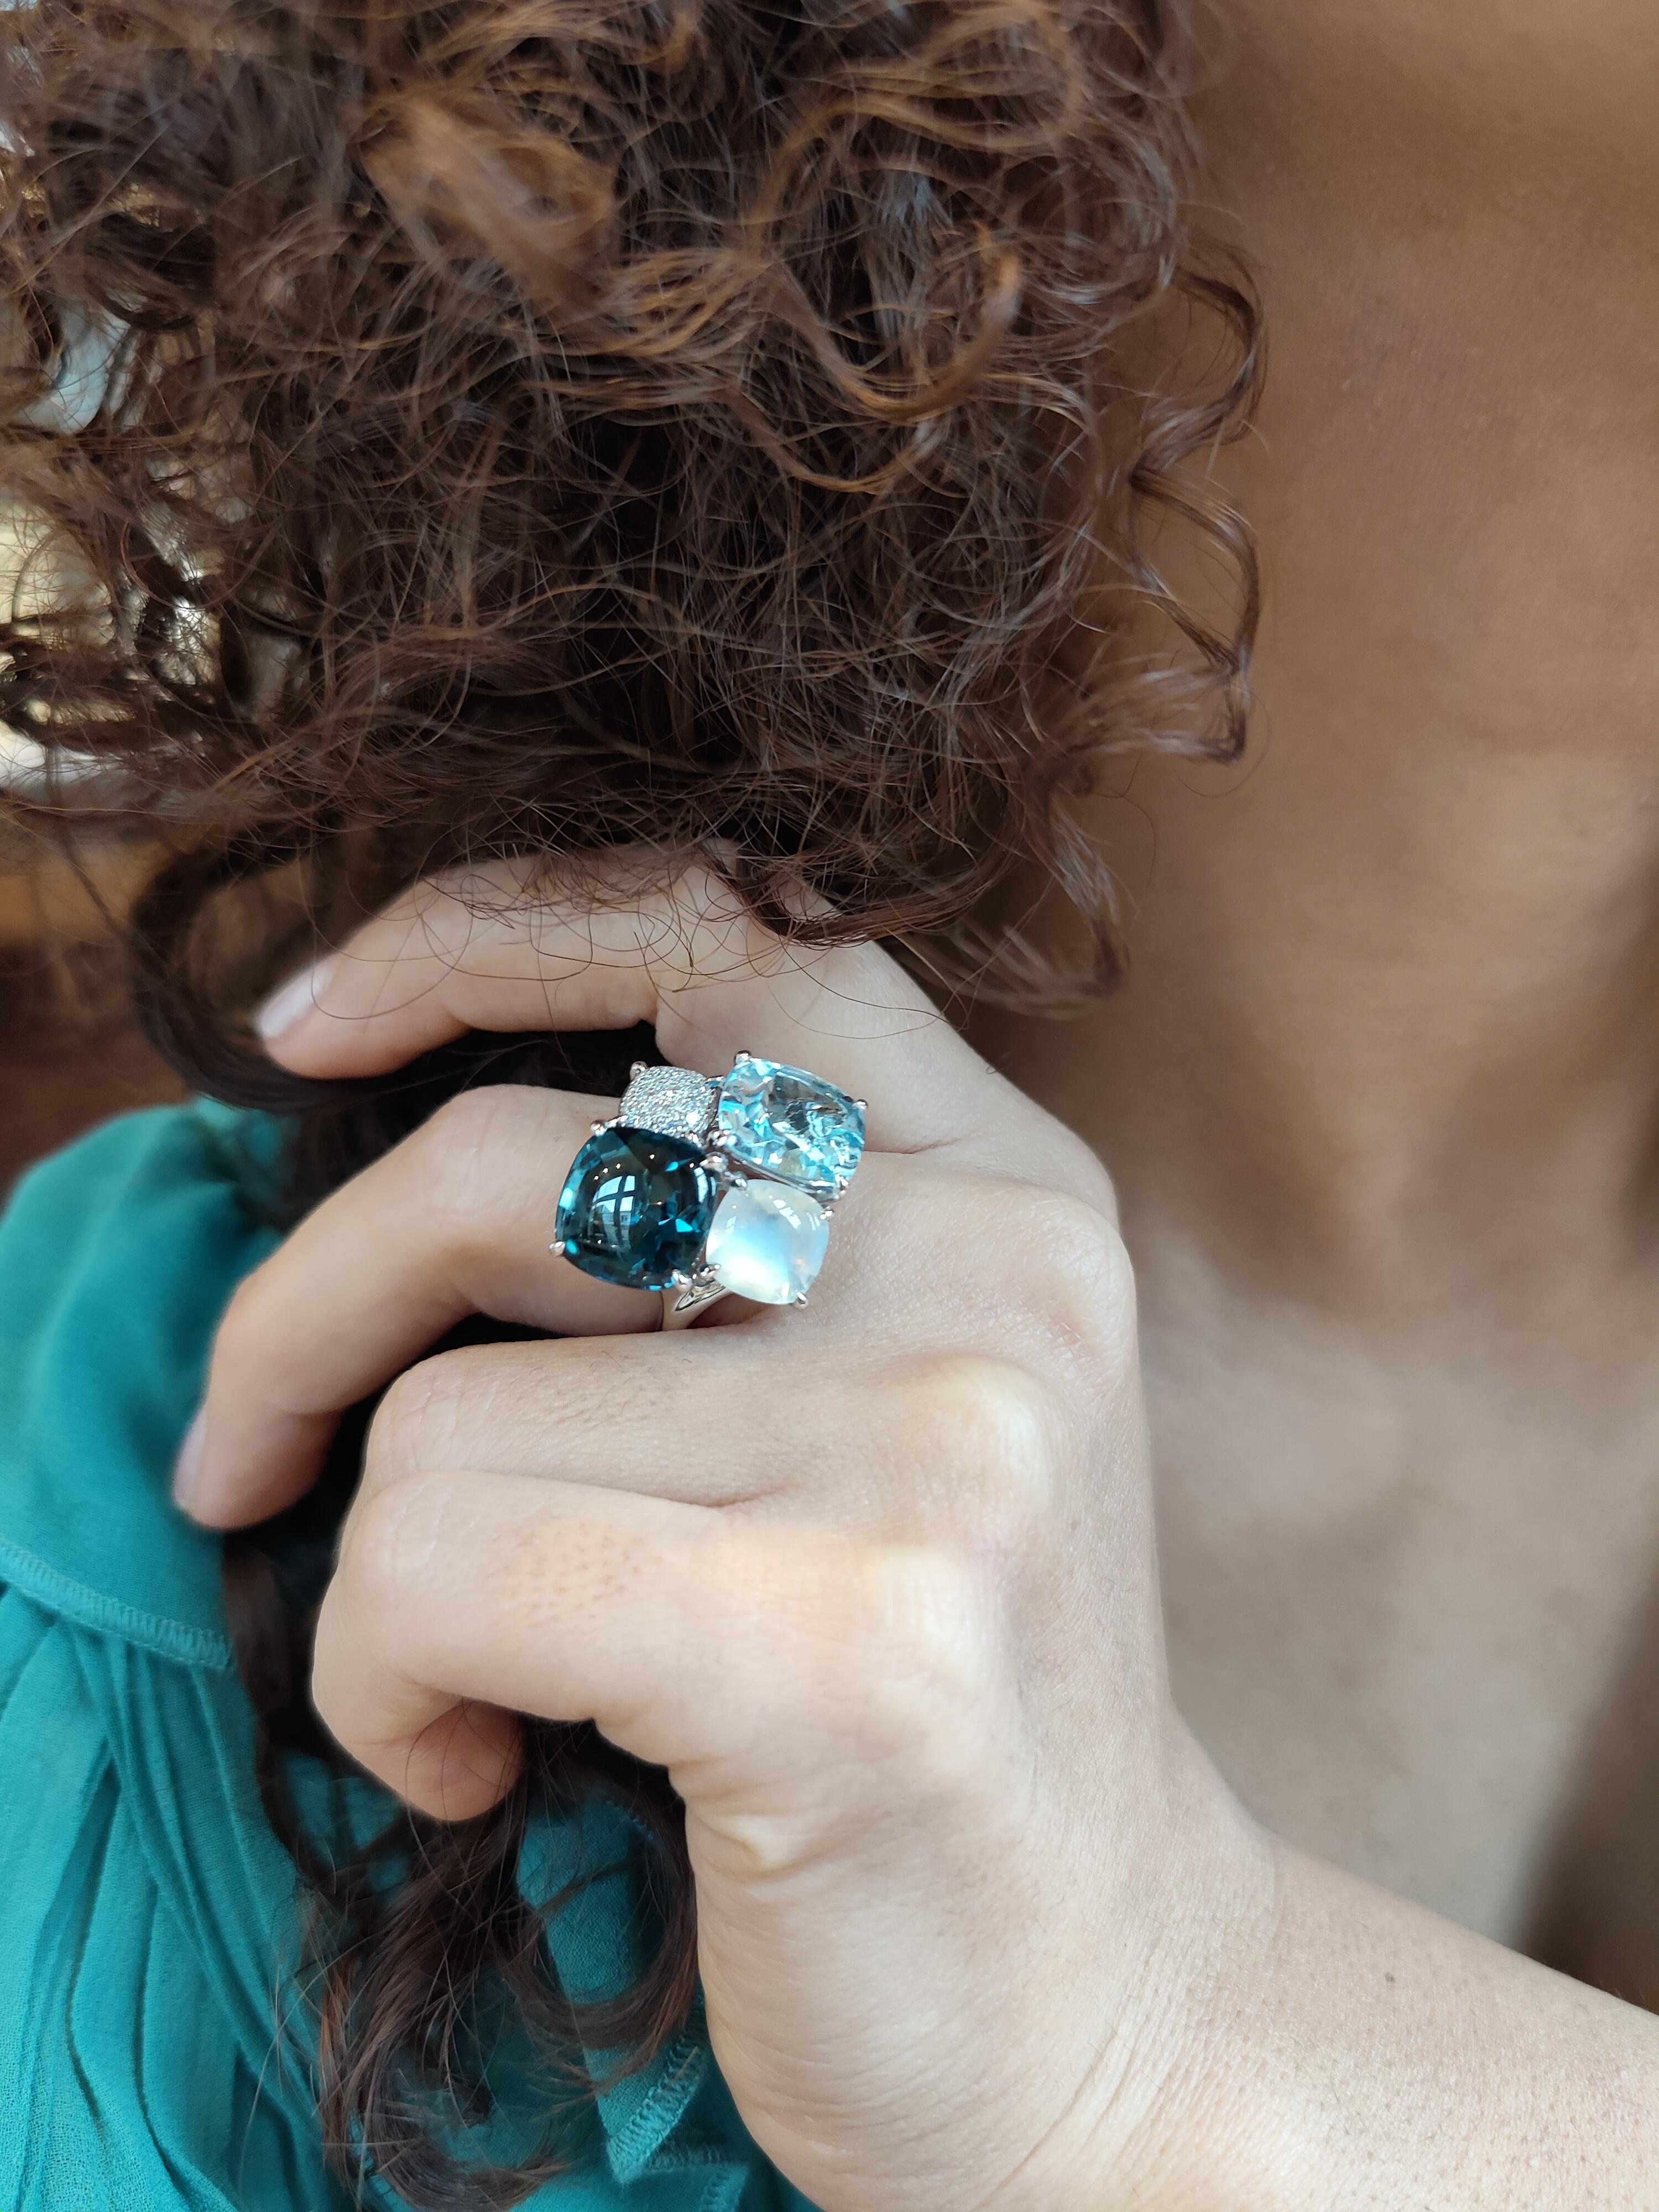 Rich color, abundant sparkle and striking contrast combine to make this ring stand out.

This gorgeous 18 karat white gold cocktail ring in blue hues features a cushion-cut London blue topaz, the deep indigo blue member of the topaz gemstone family.